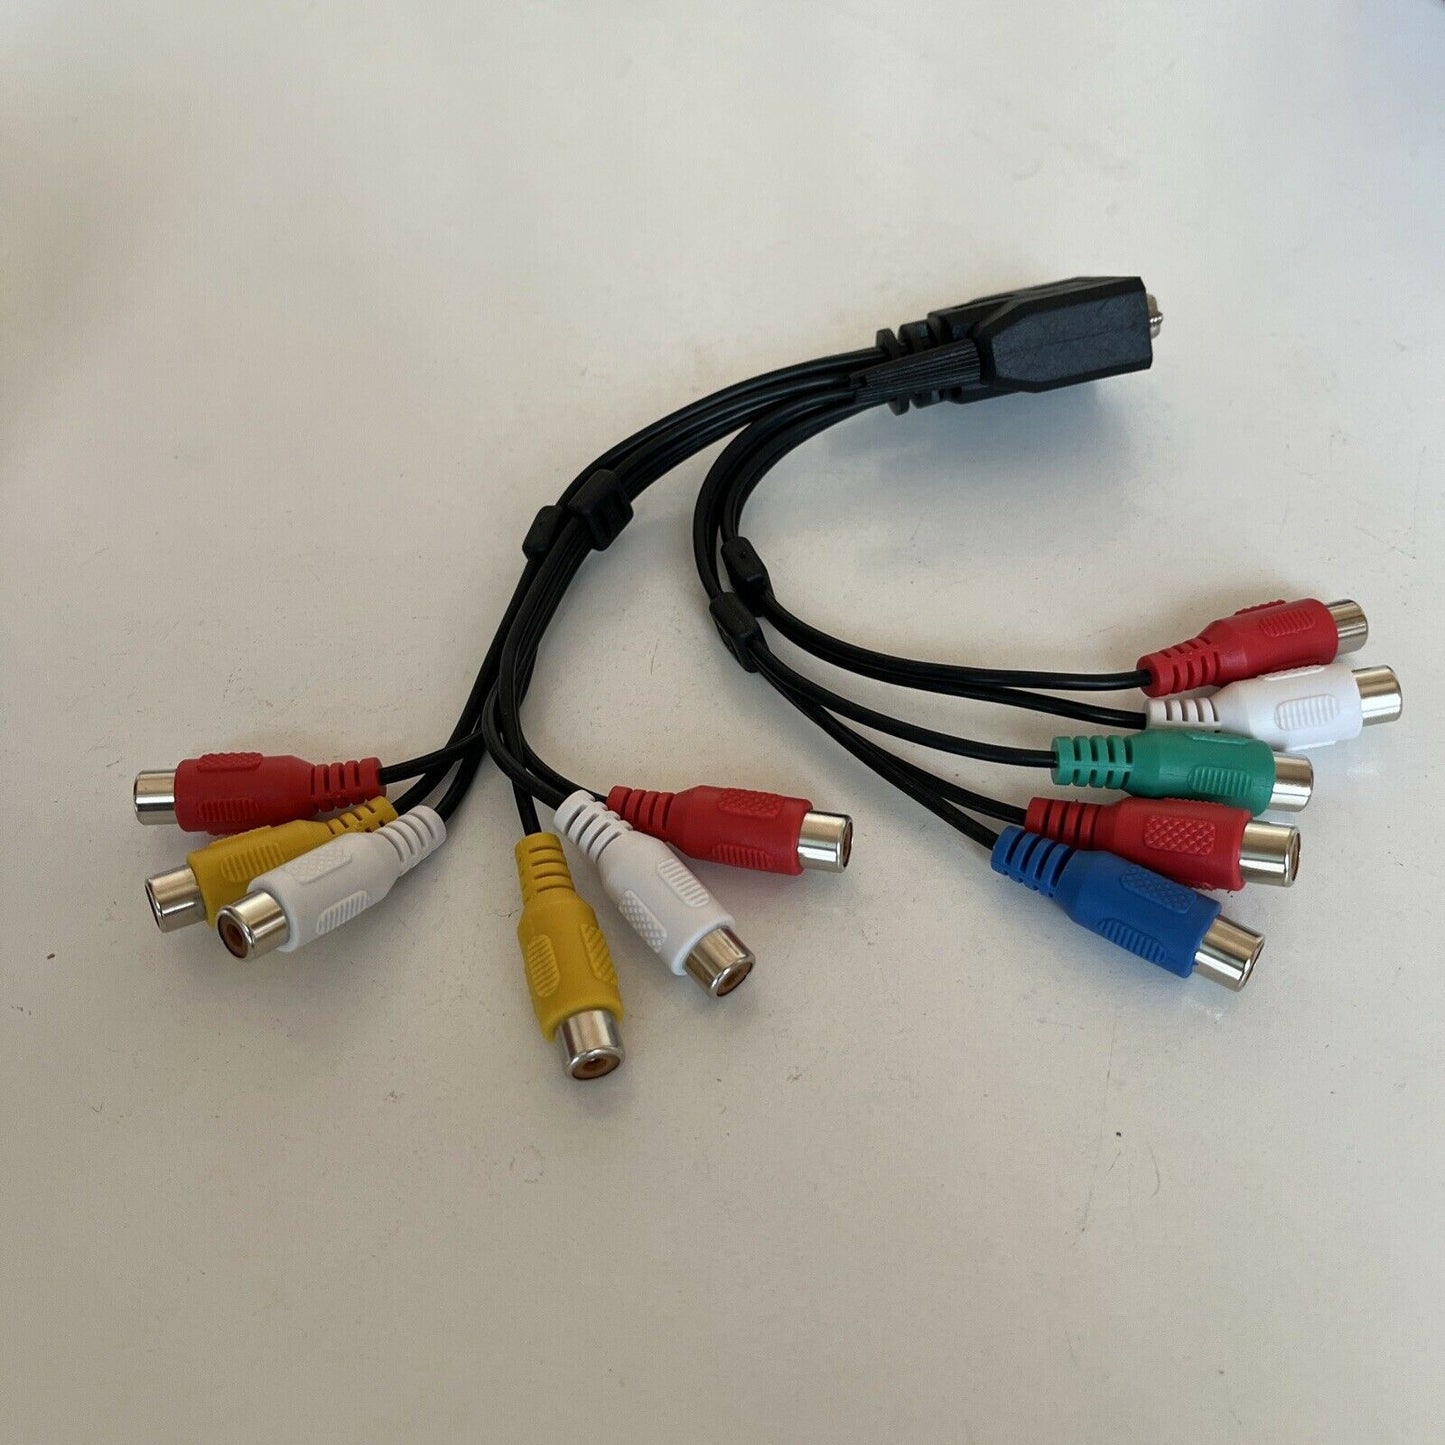 VGA To Composite Component Cable